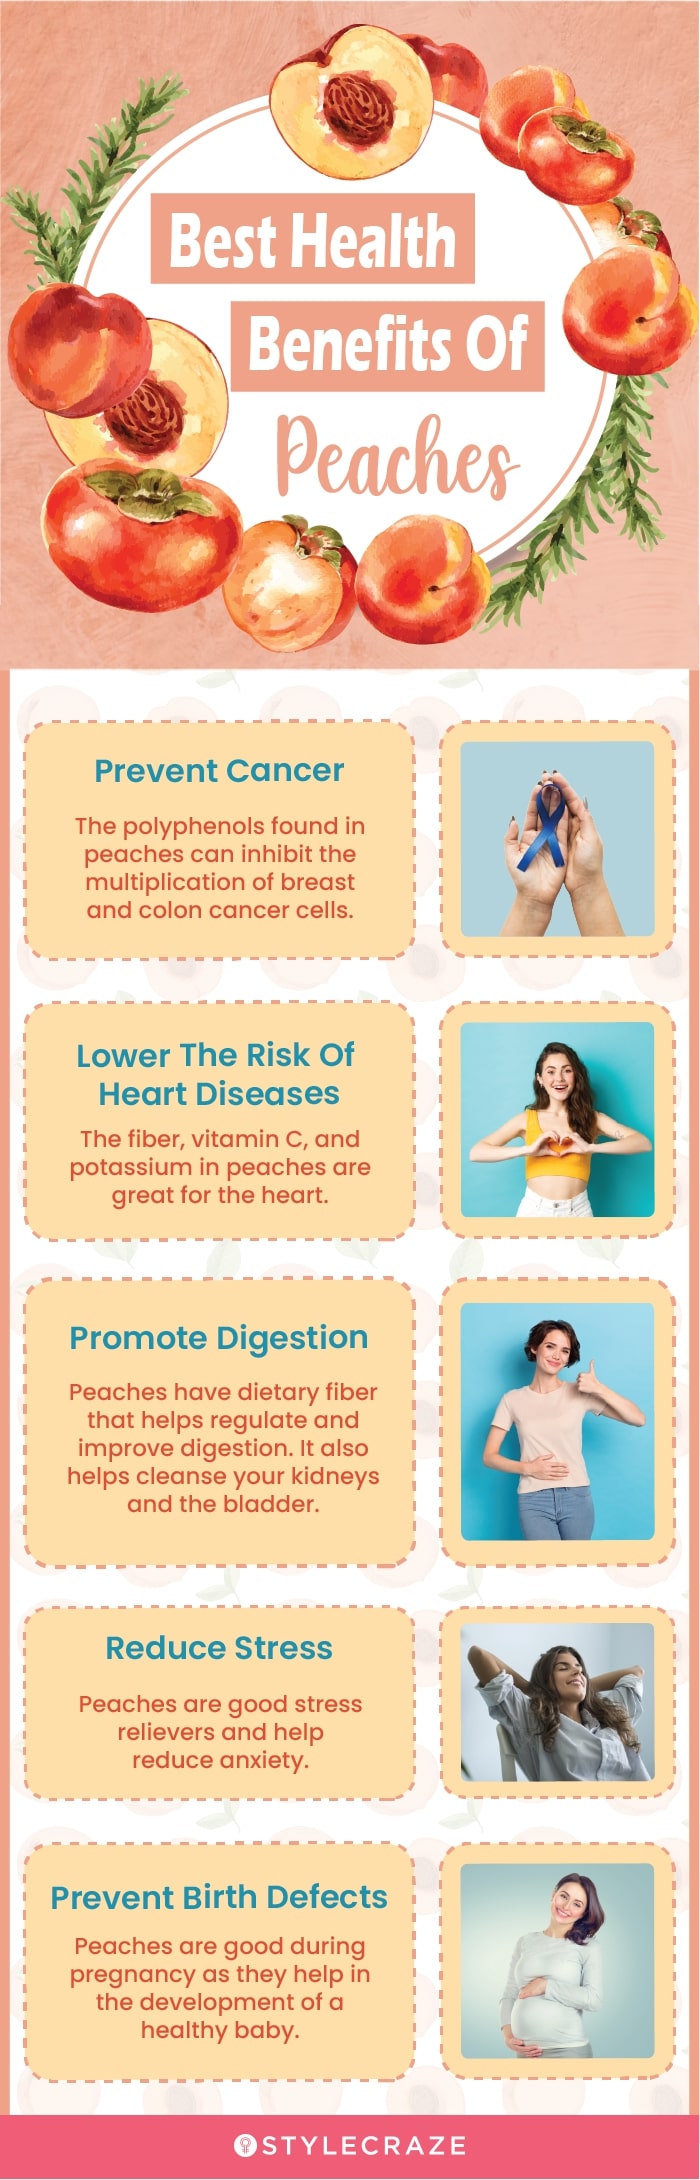 best health benefits of peaches(infographic)